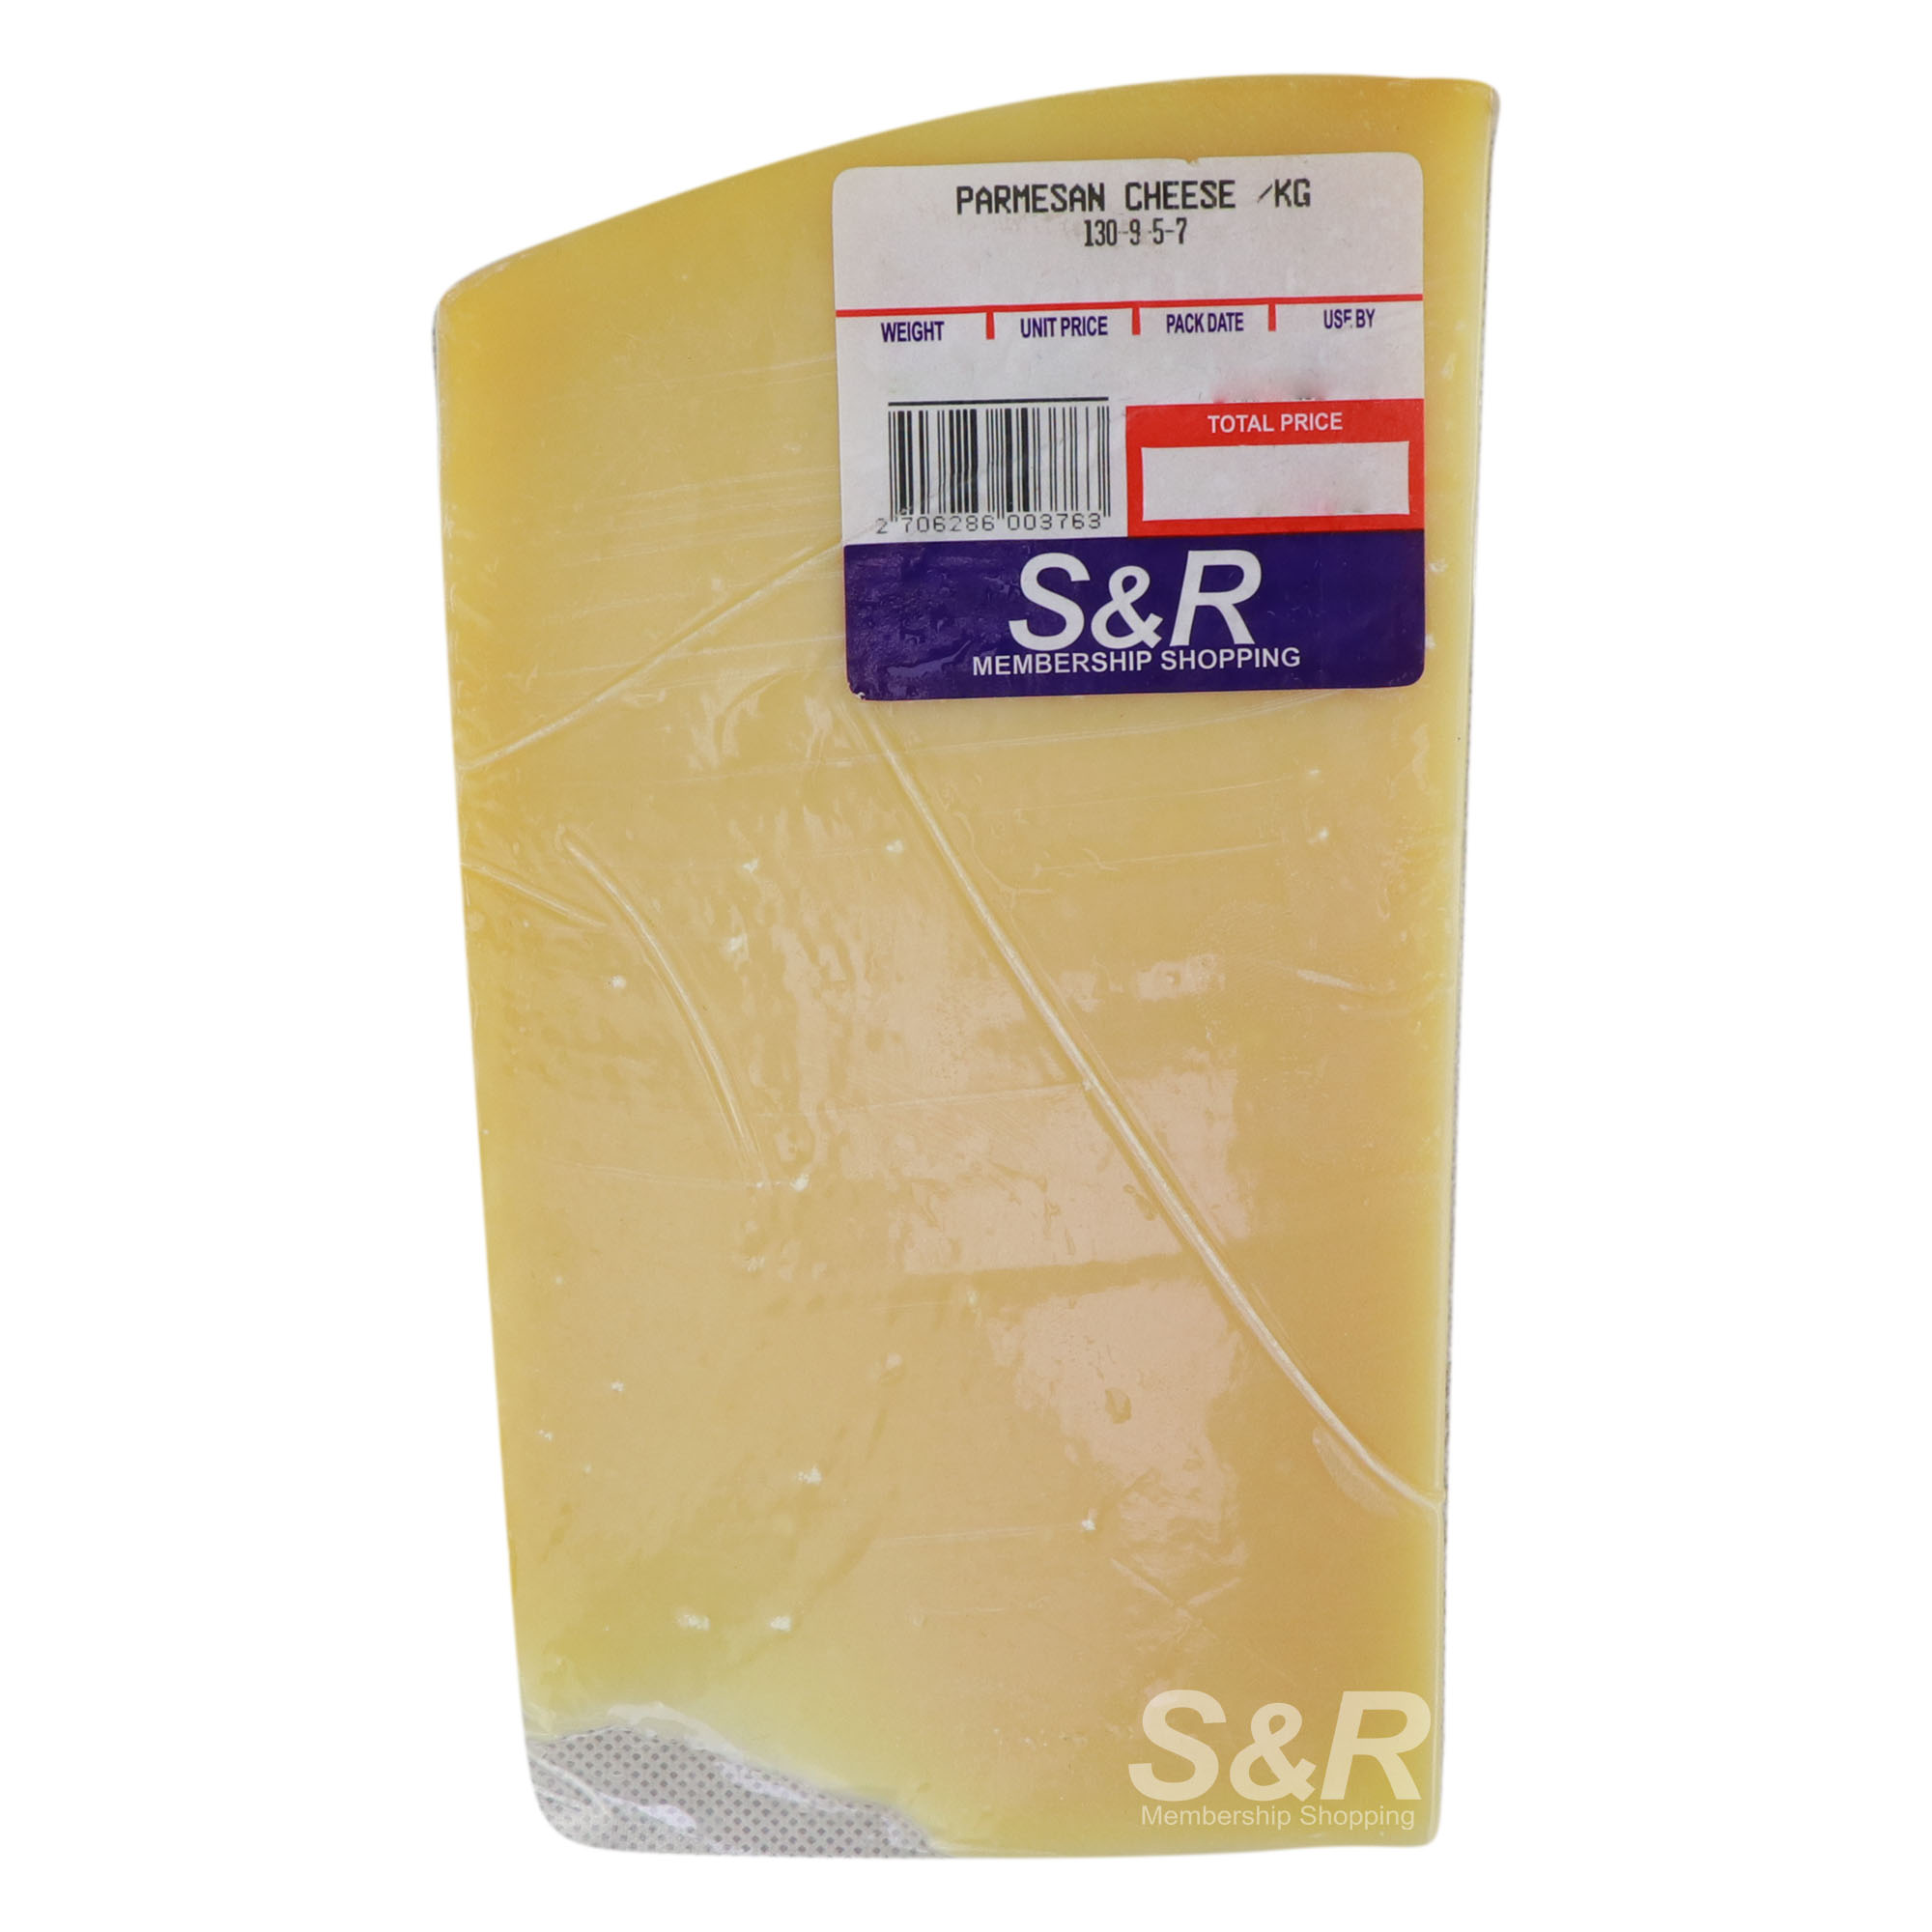 S&R Parmesan Cheese approx. 400g